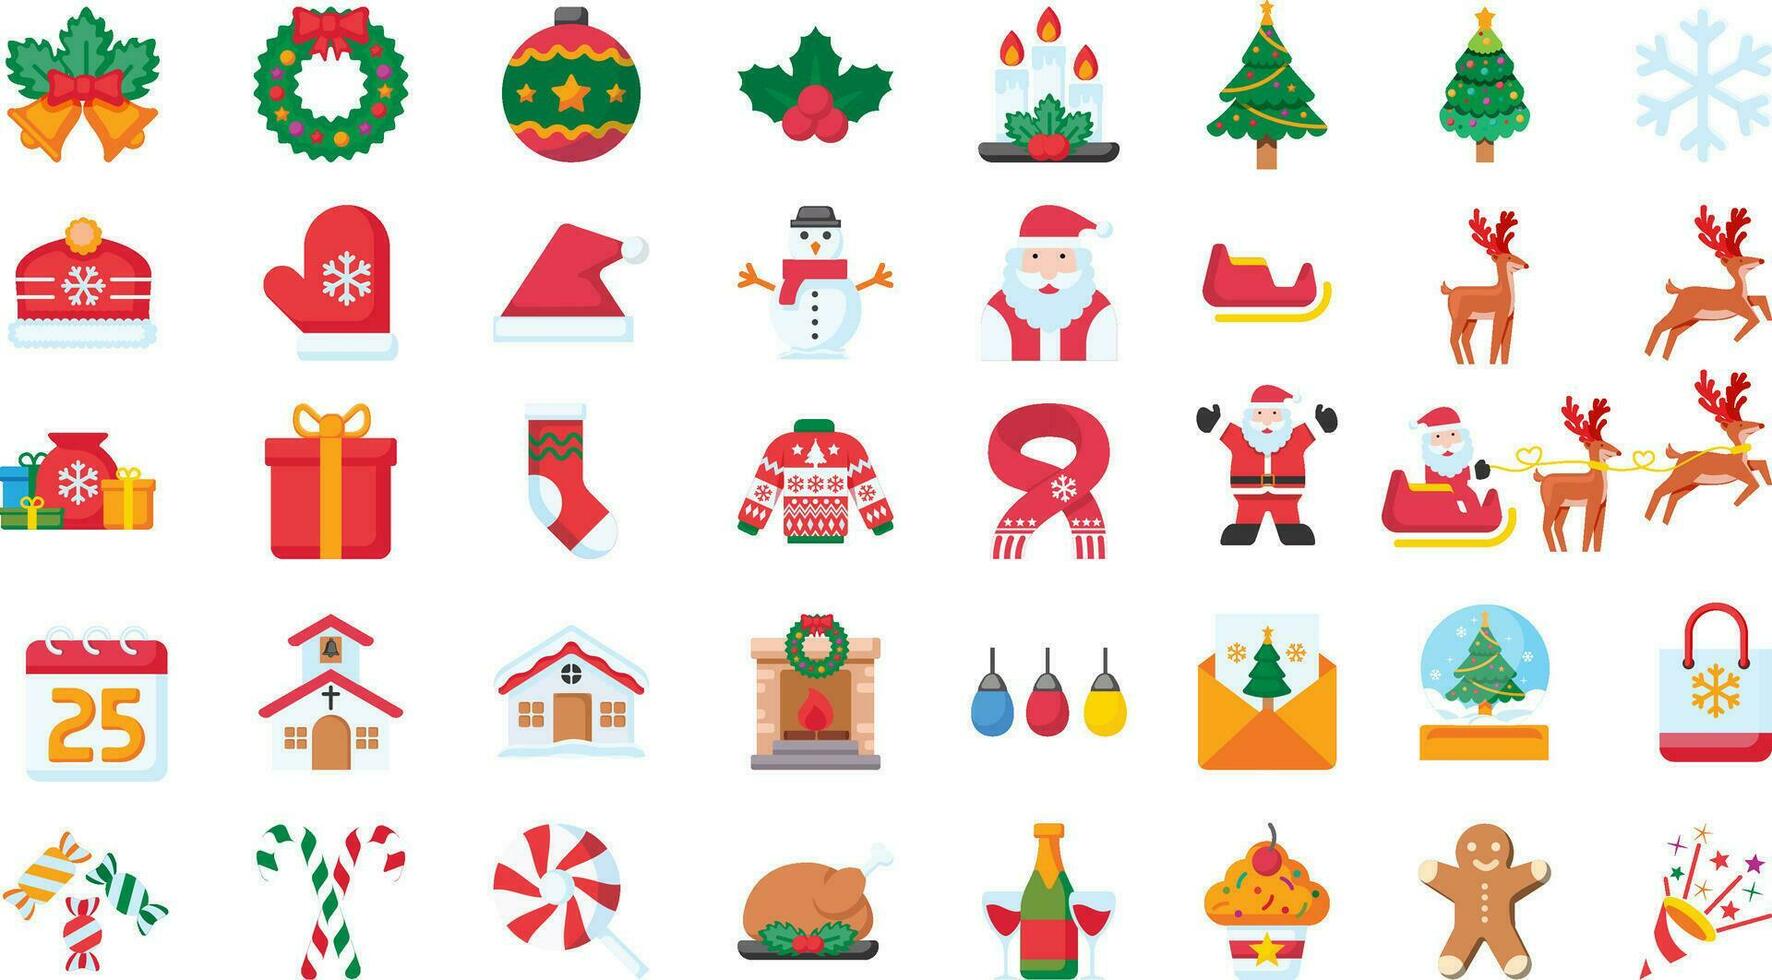 Flat vector set of colorful items related to Christmas. Santa Claus, snowman, gifts and tree. Elements for greeting cards.